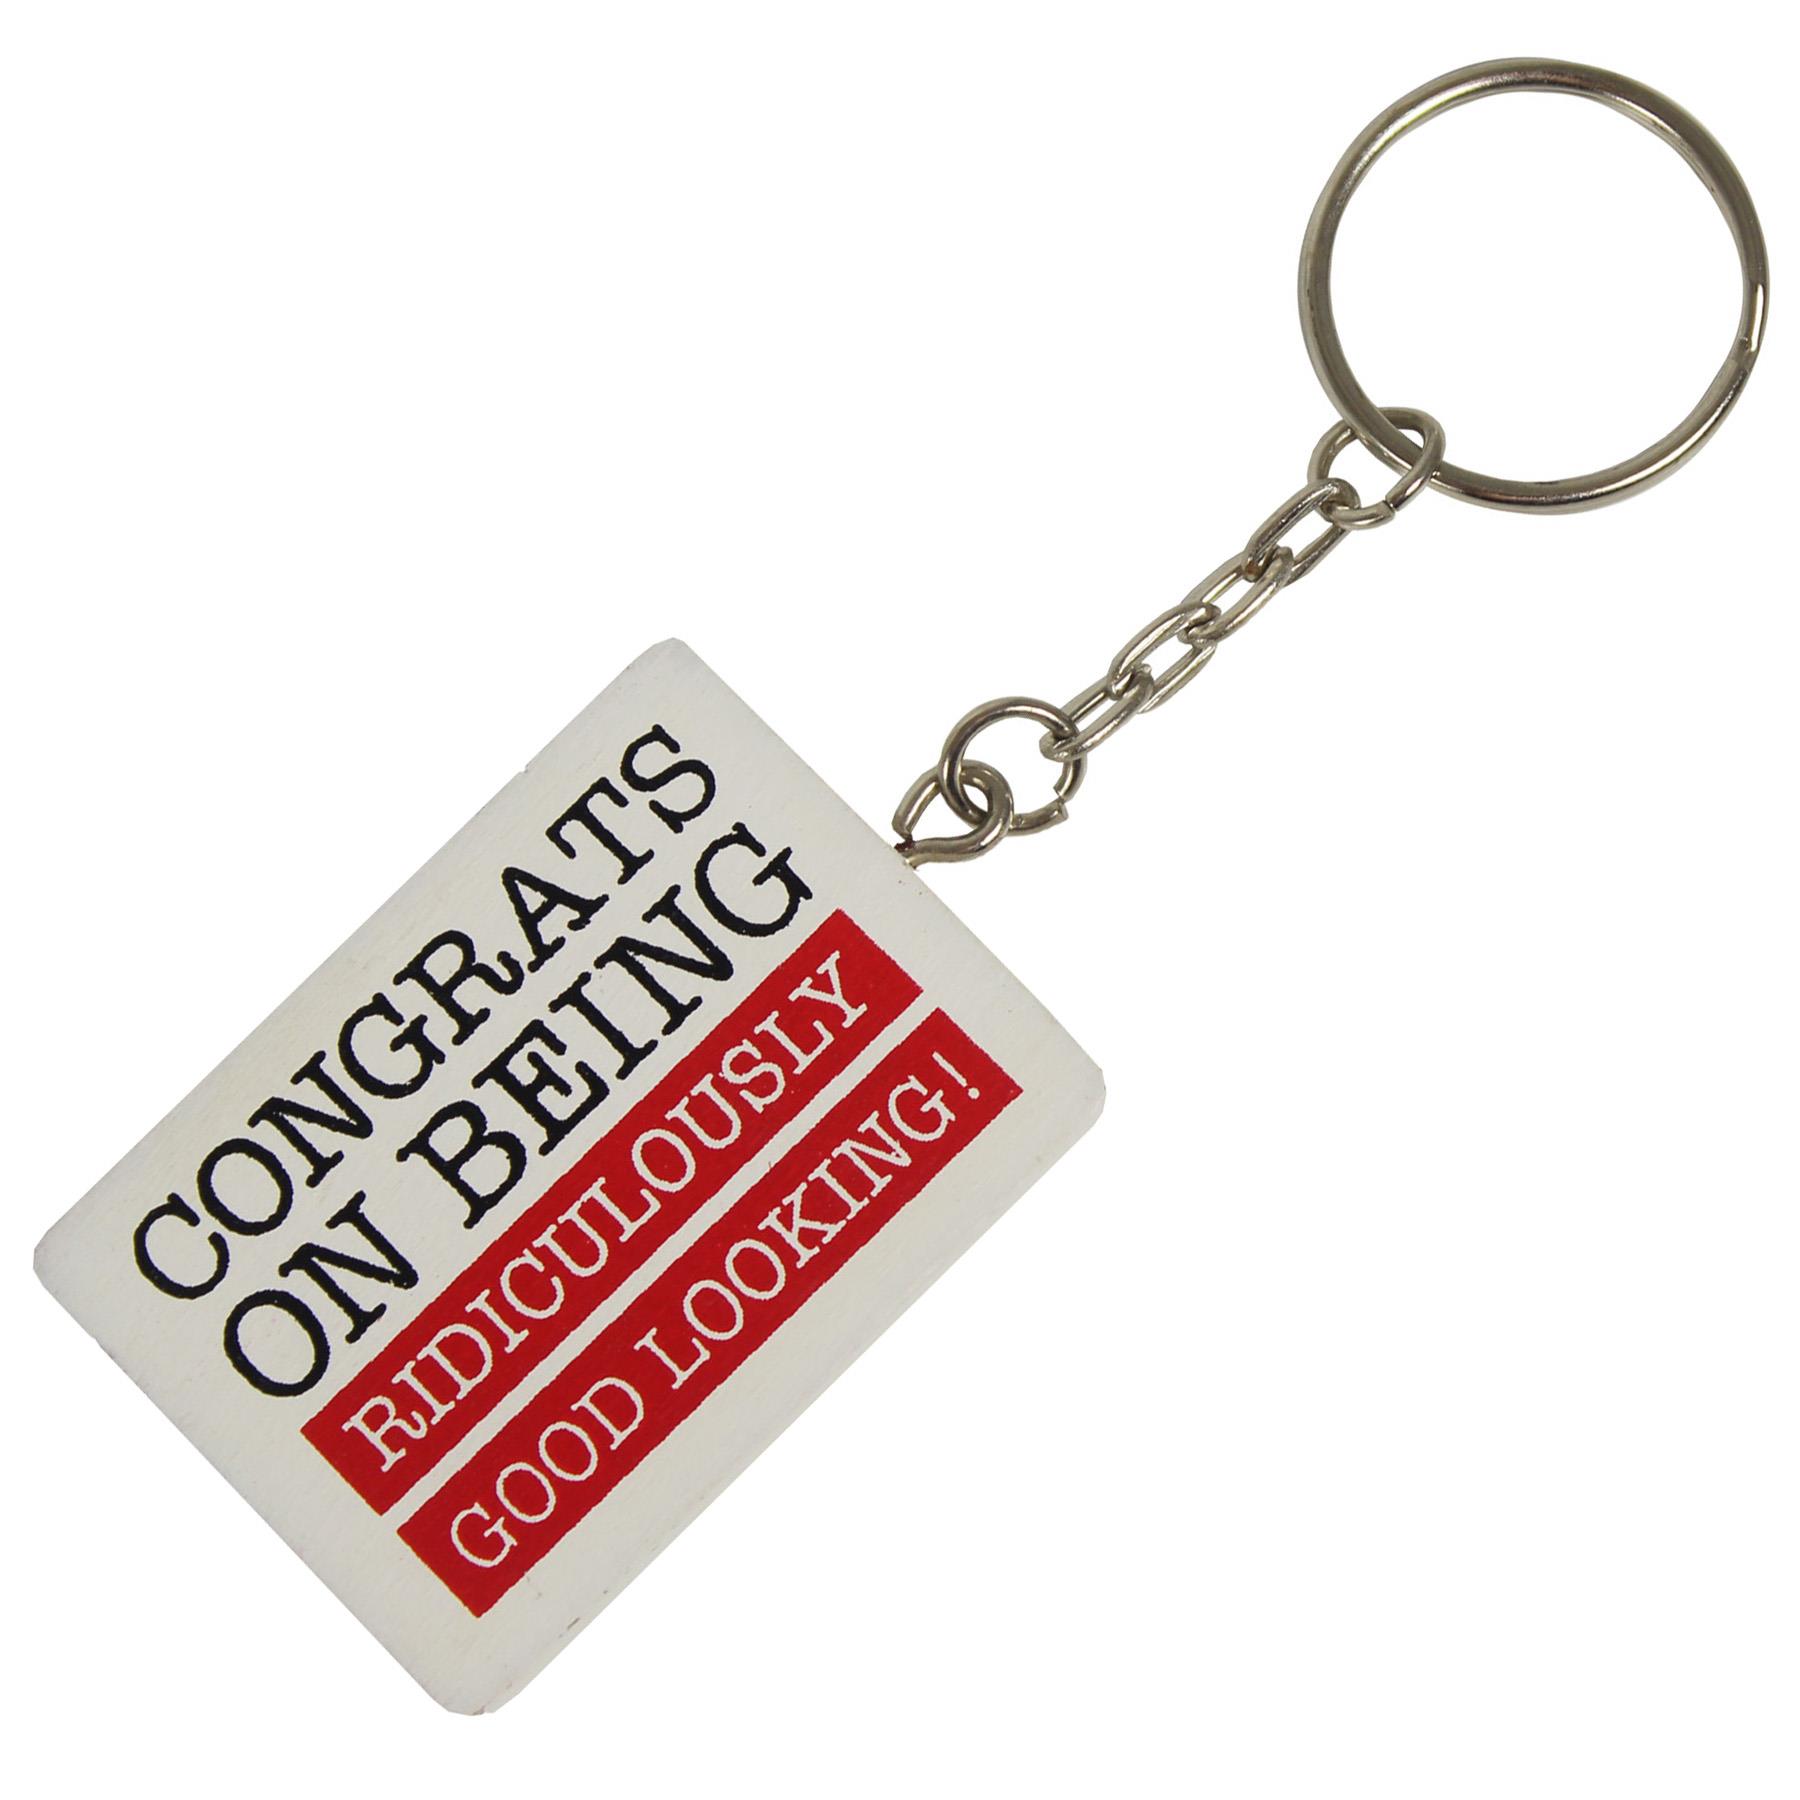 'Congrats on being Ridiculously Good Looking' Key Ring - Valentine's Day